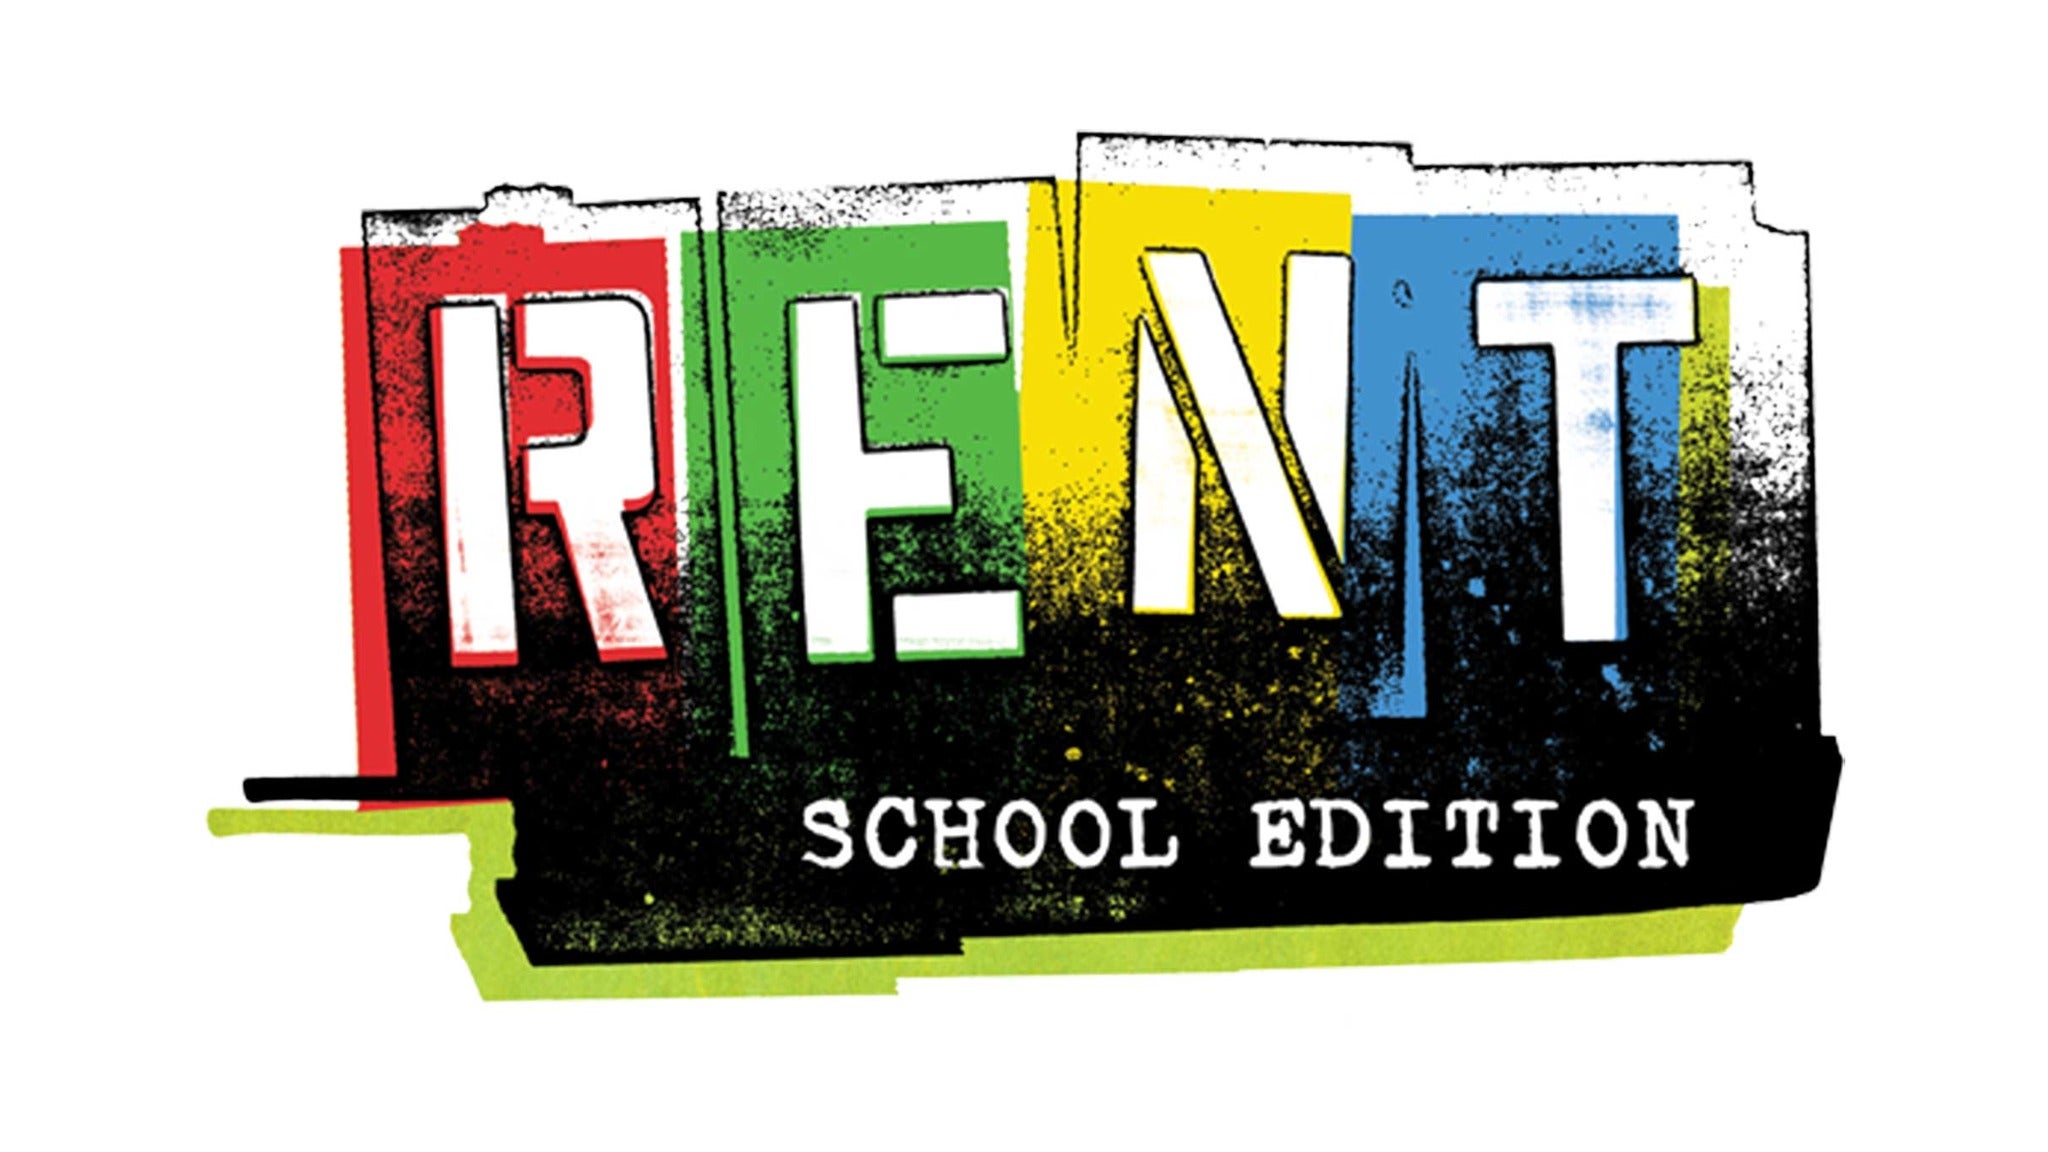 Rent (Touring) in Memphis promo photo for Enews presale offer code